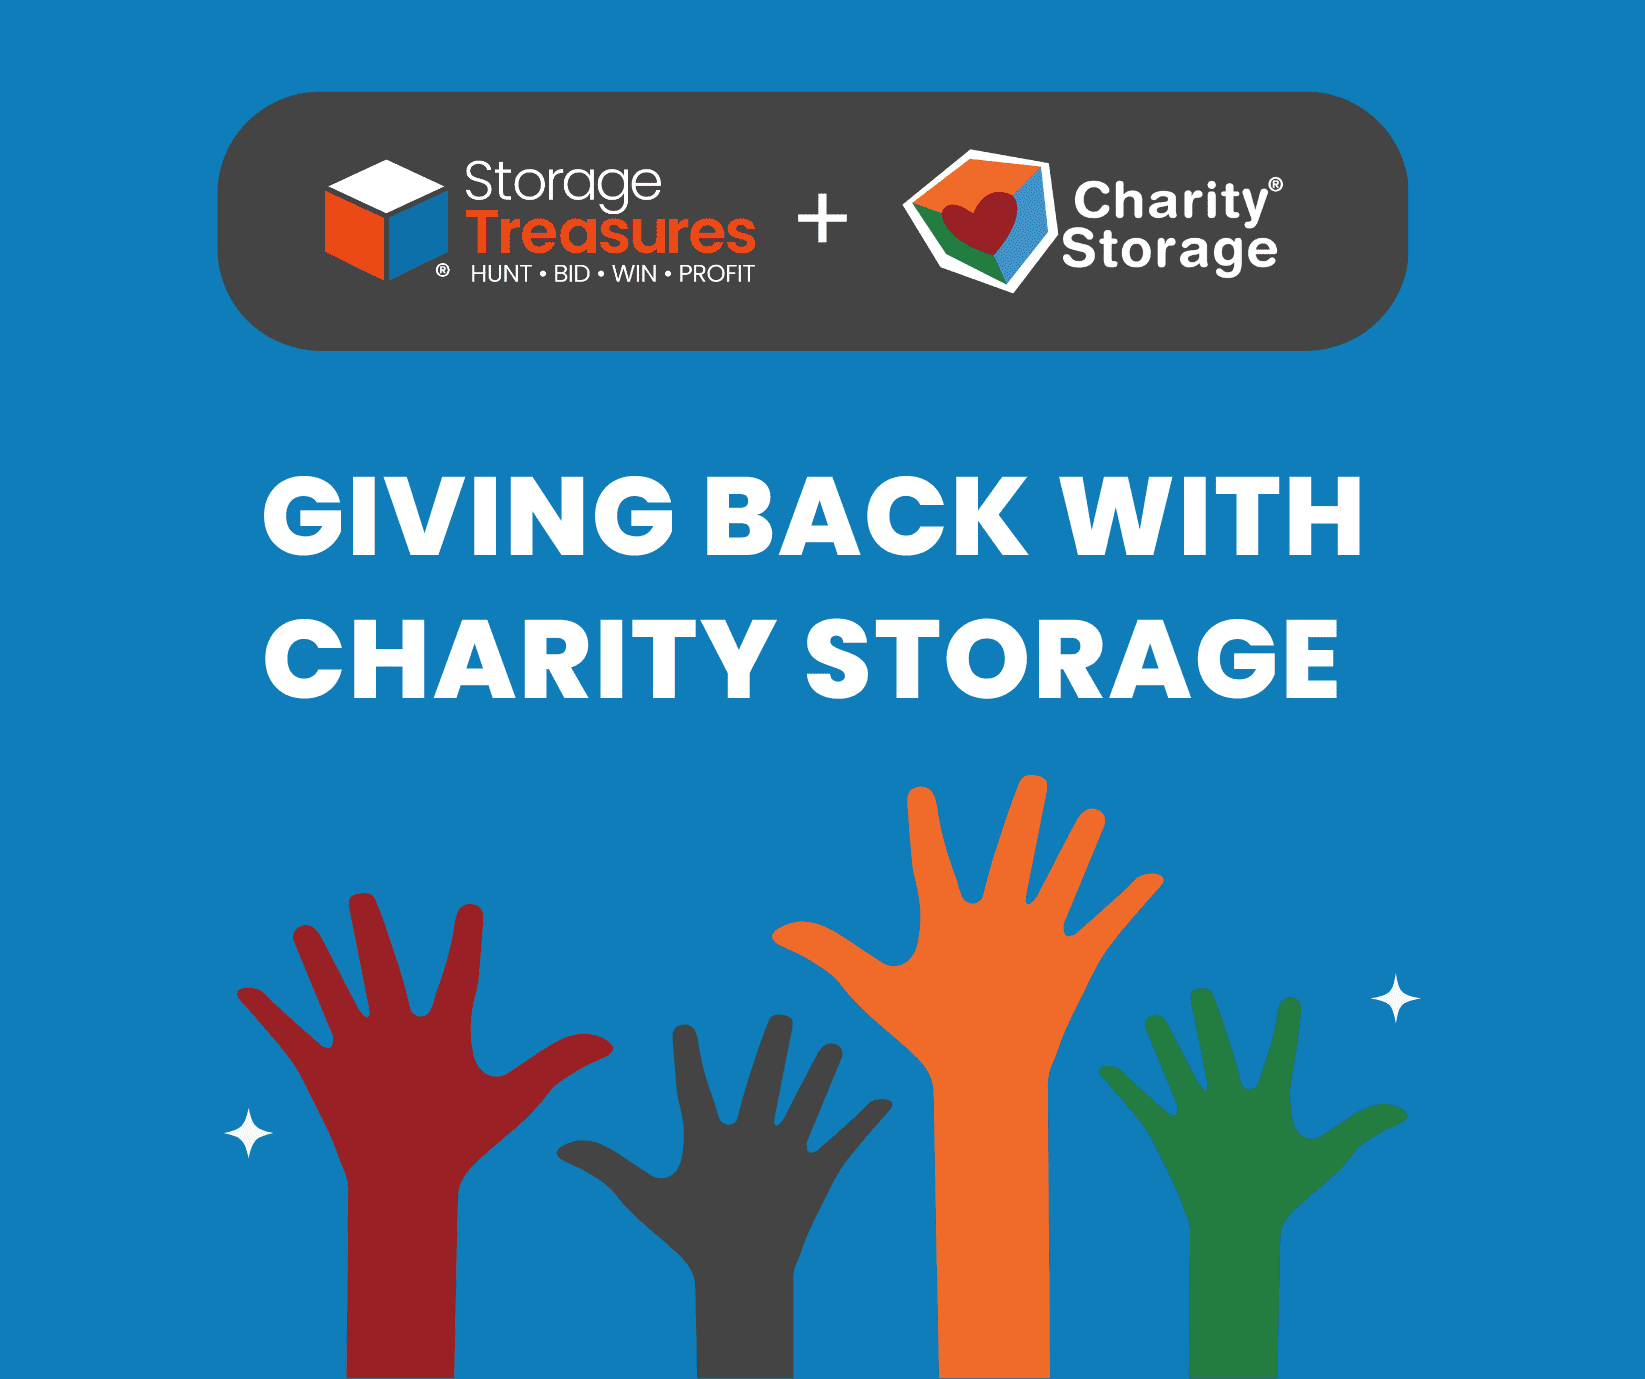 A charity self storage auction from StorageTreasures.com